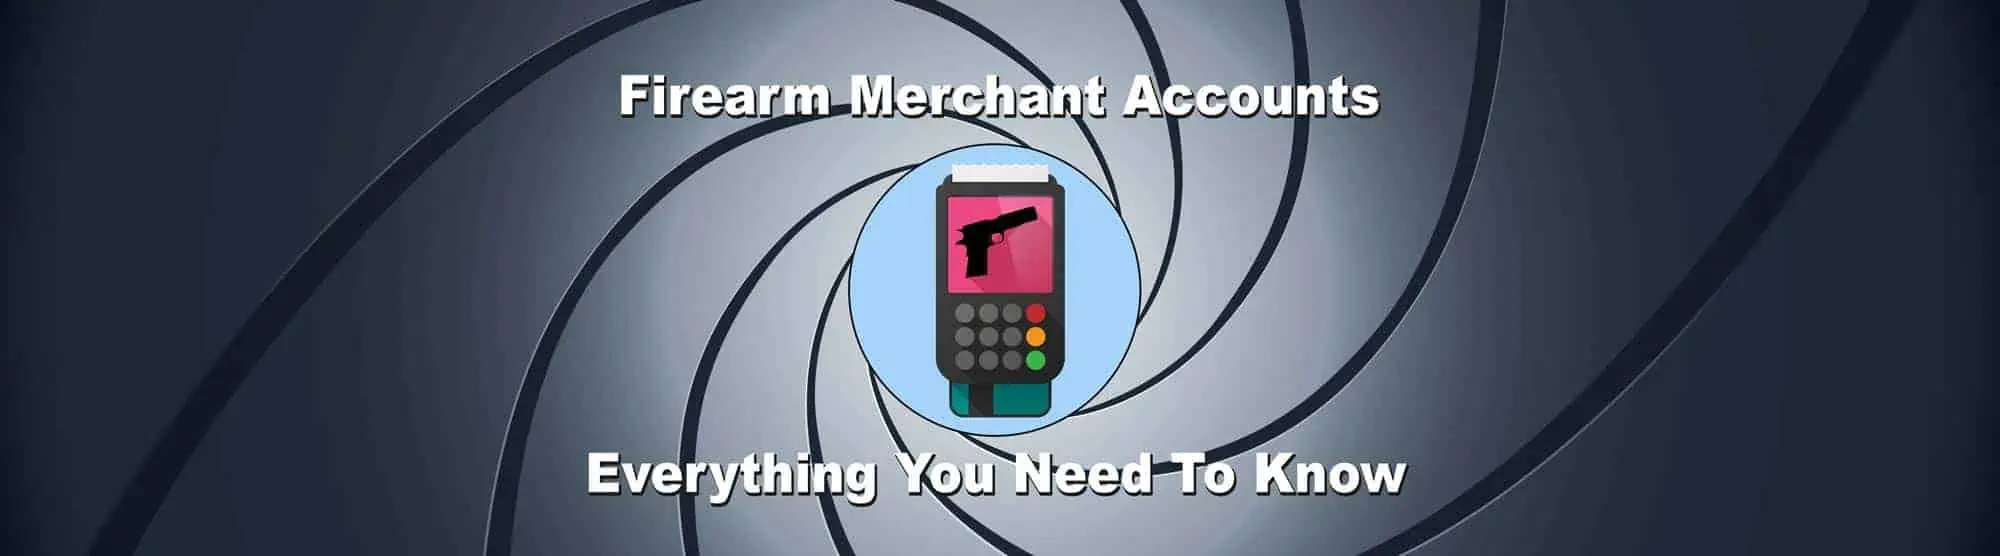 Firearm Merchant Accounts - What you need to know